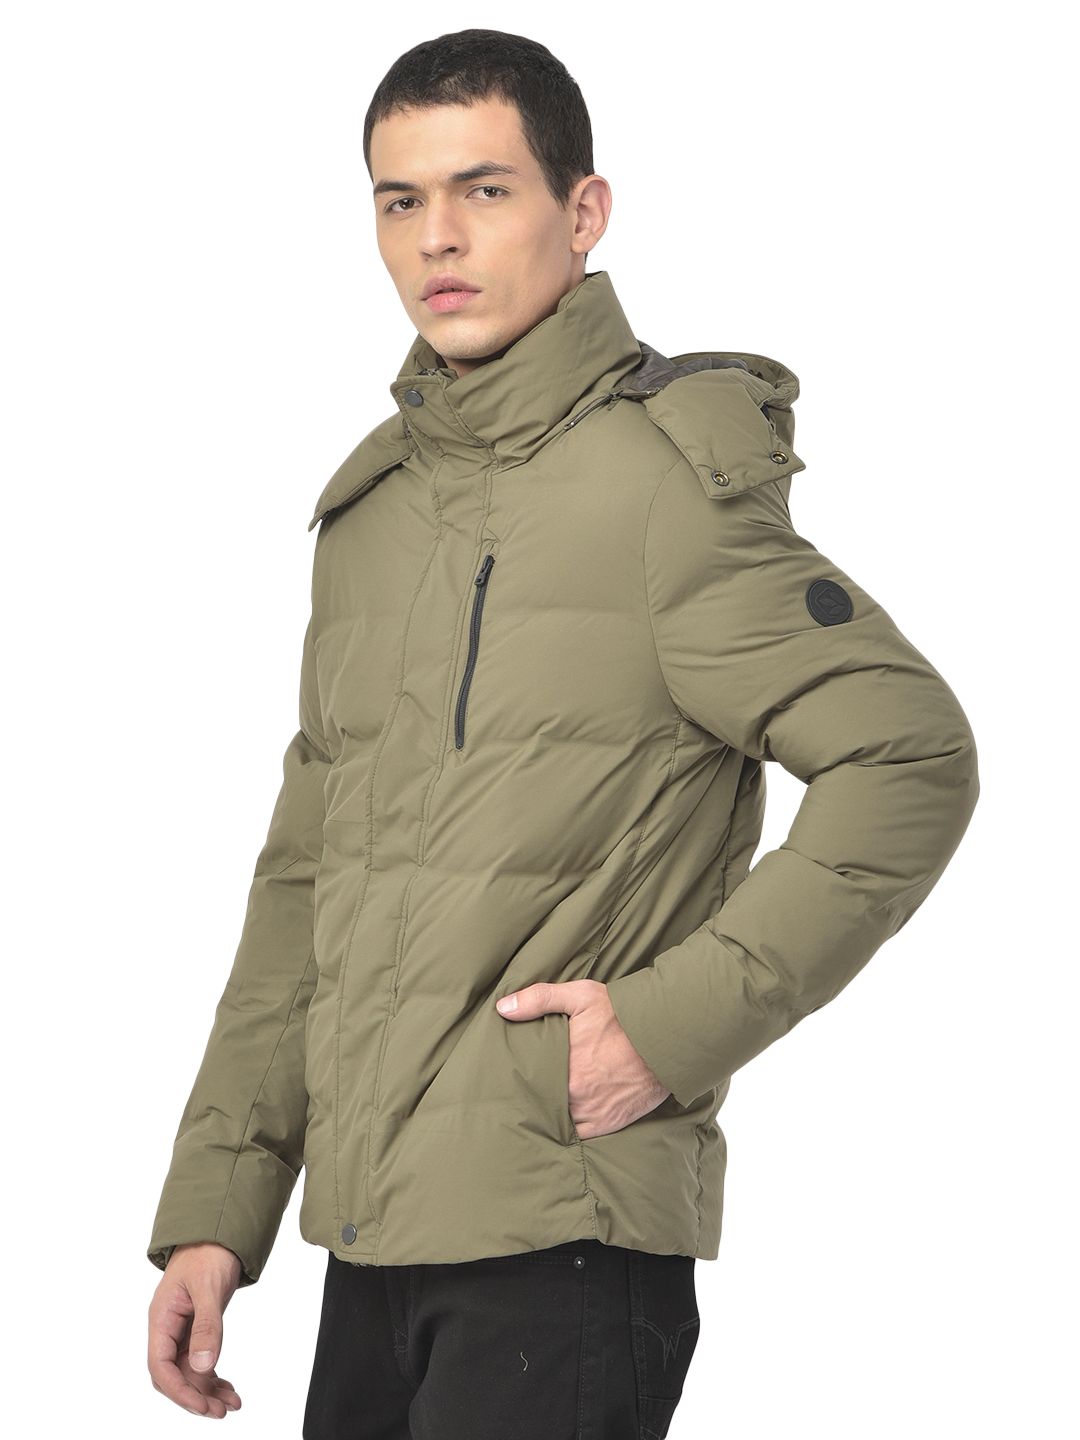 Military Surplus GI Camouflage Rain Parka - Men's | Up to 35% Off Free  Shipping over $49!